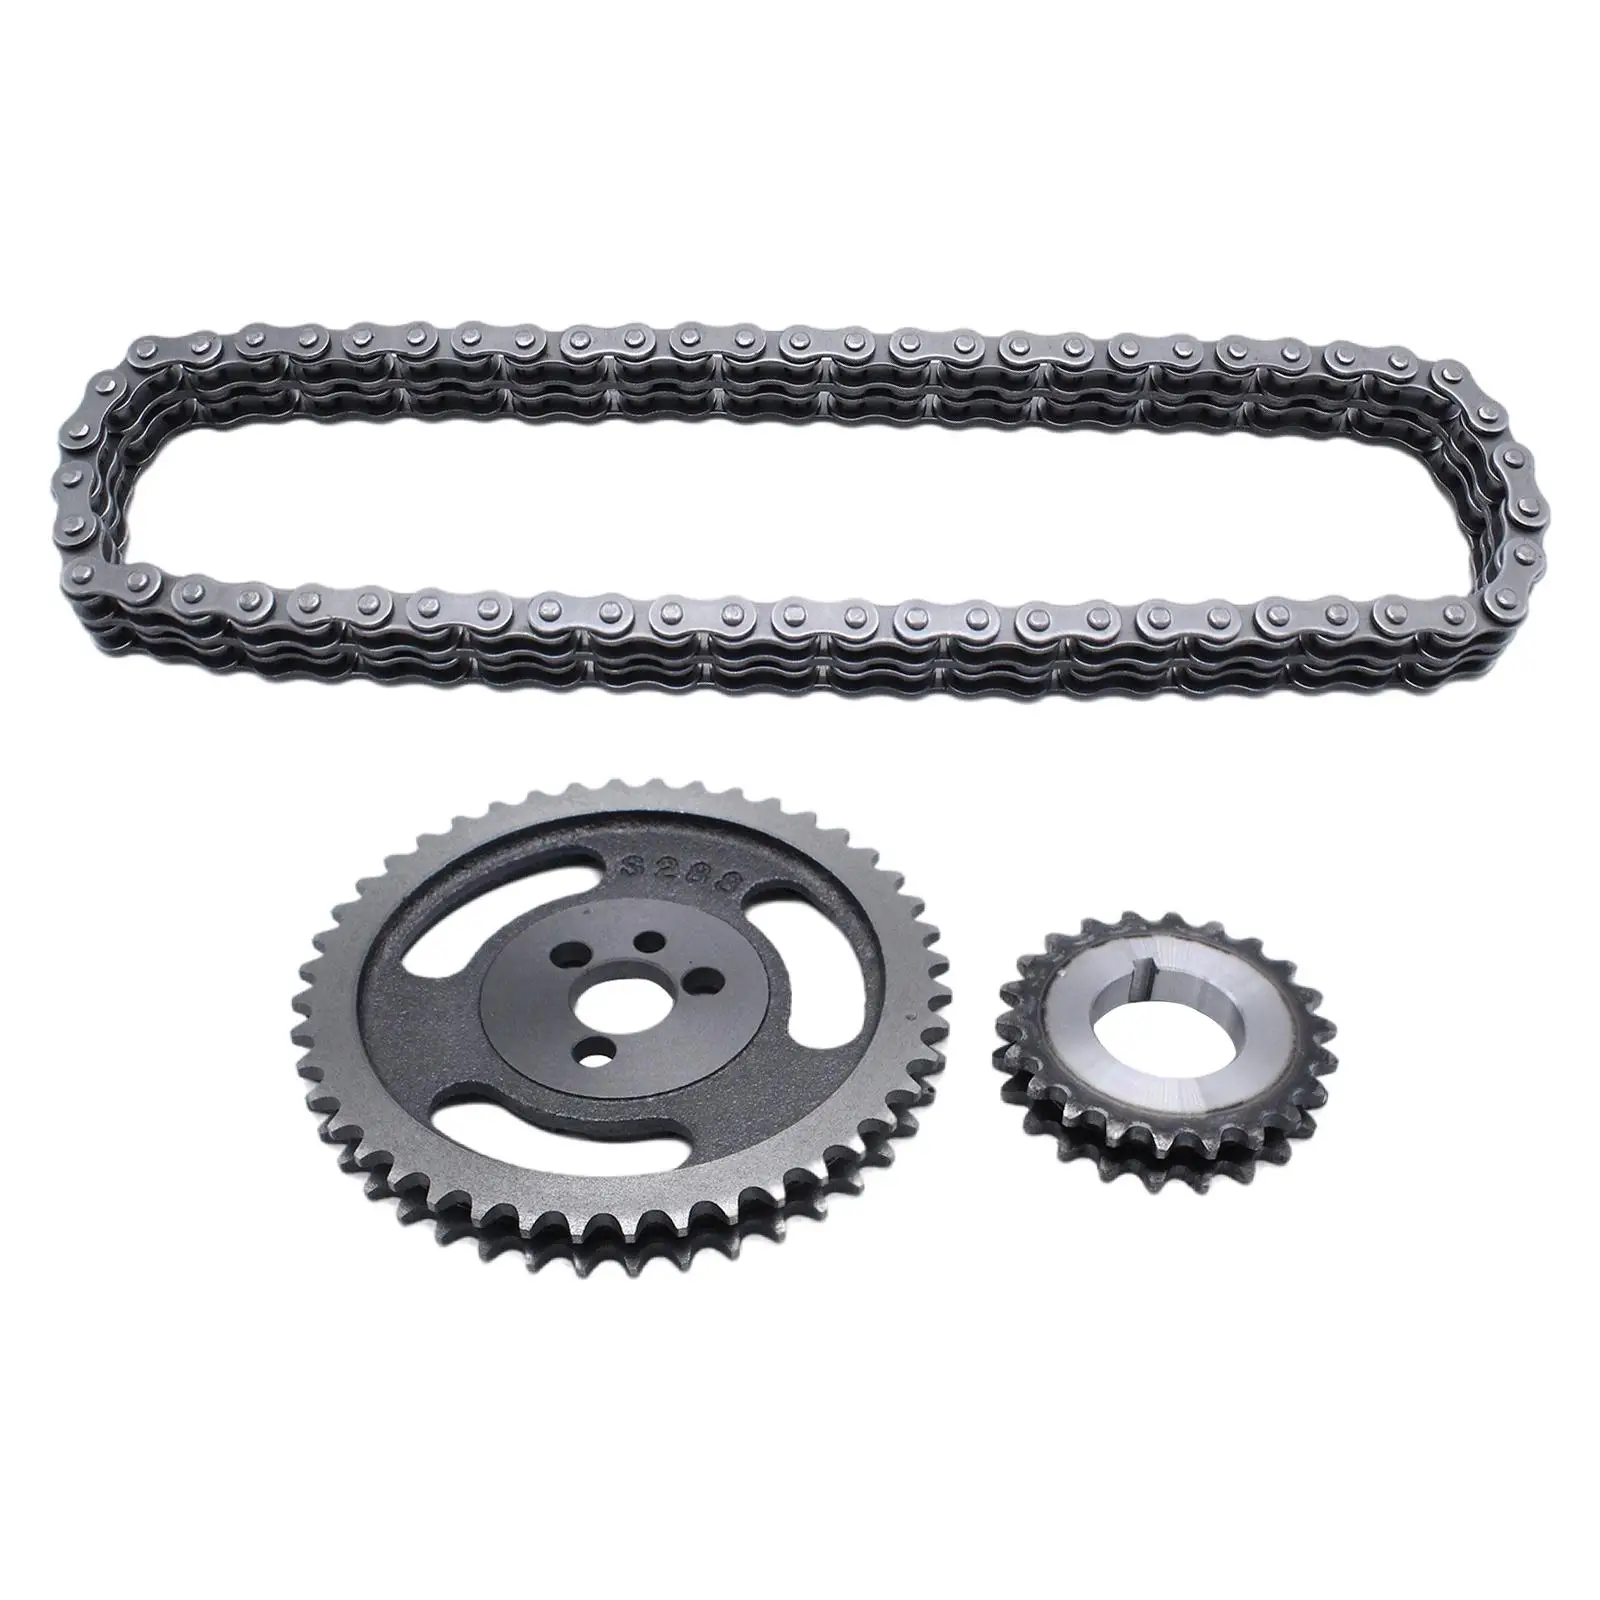 Timing Chain and Gear Set for Sbc 5.7L 283 305 327 350 383 400